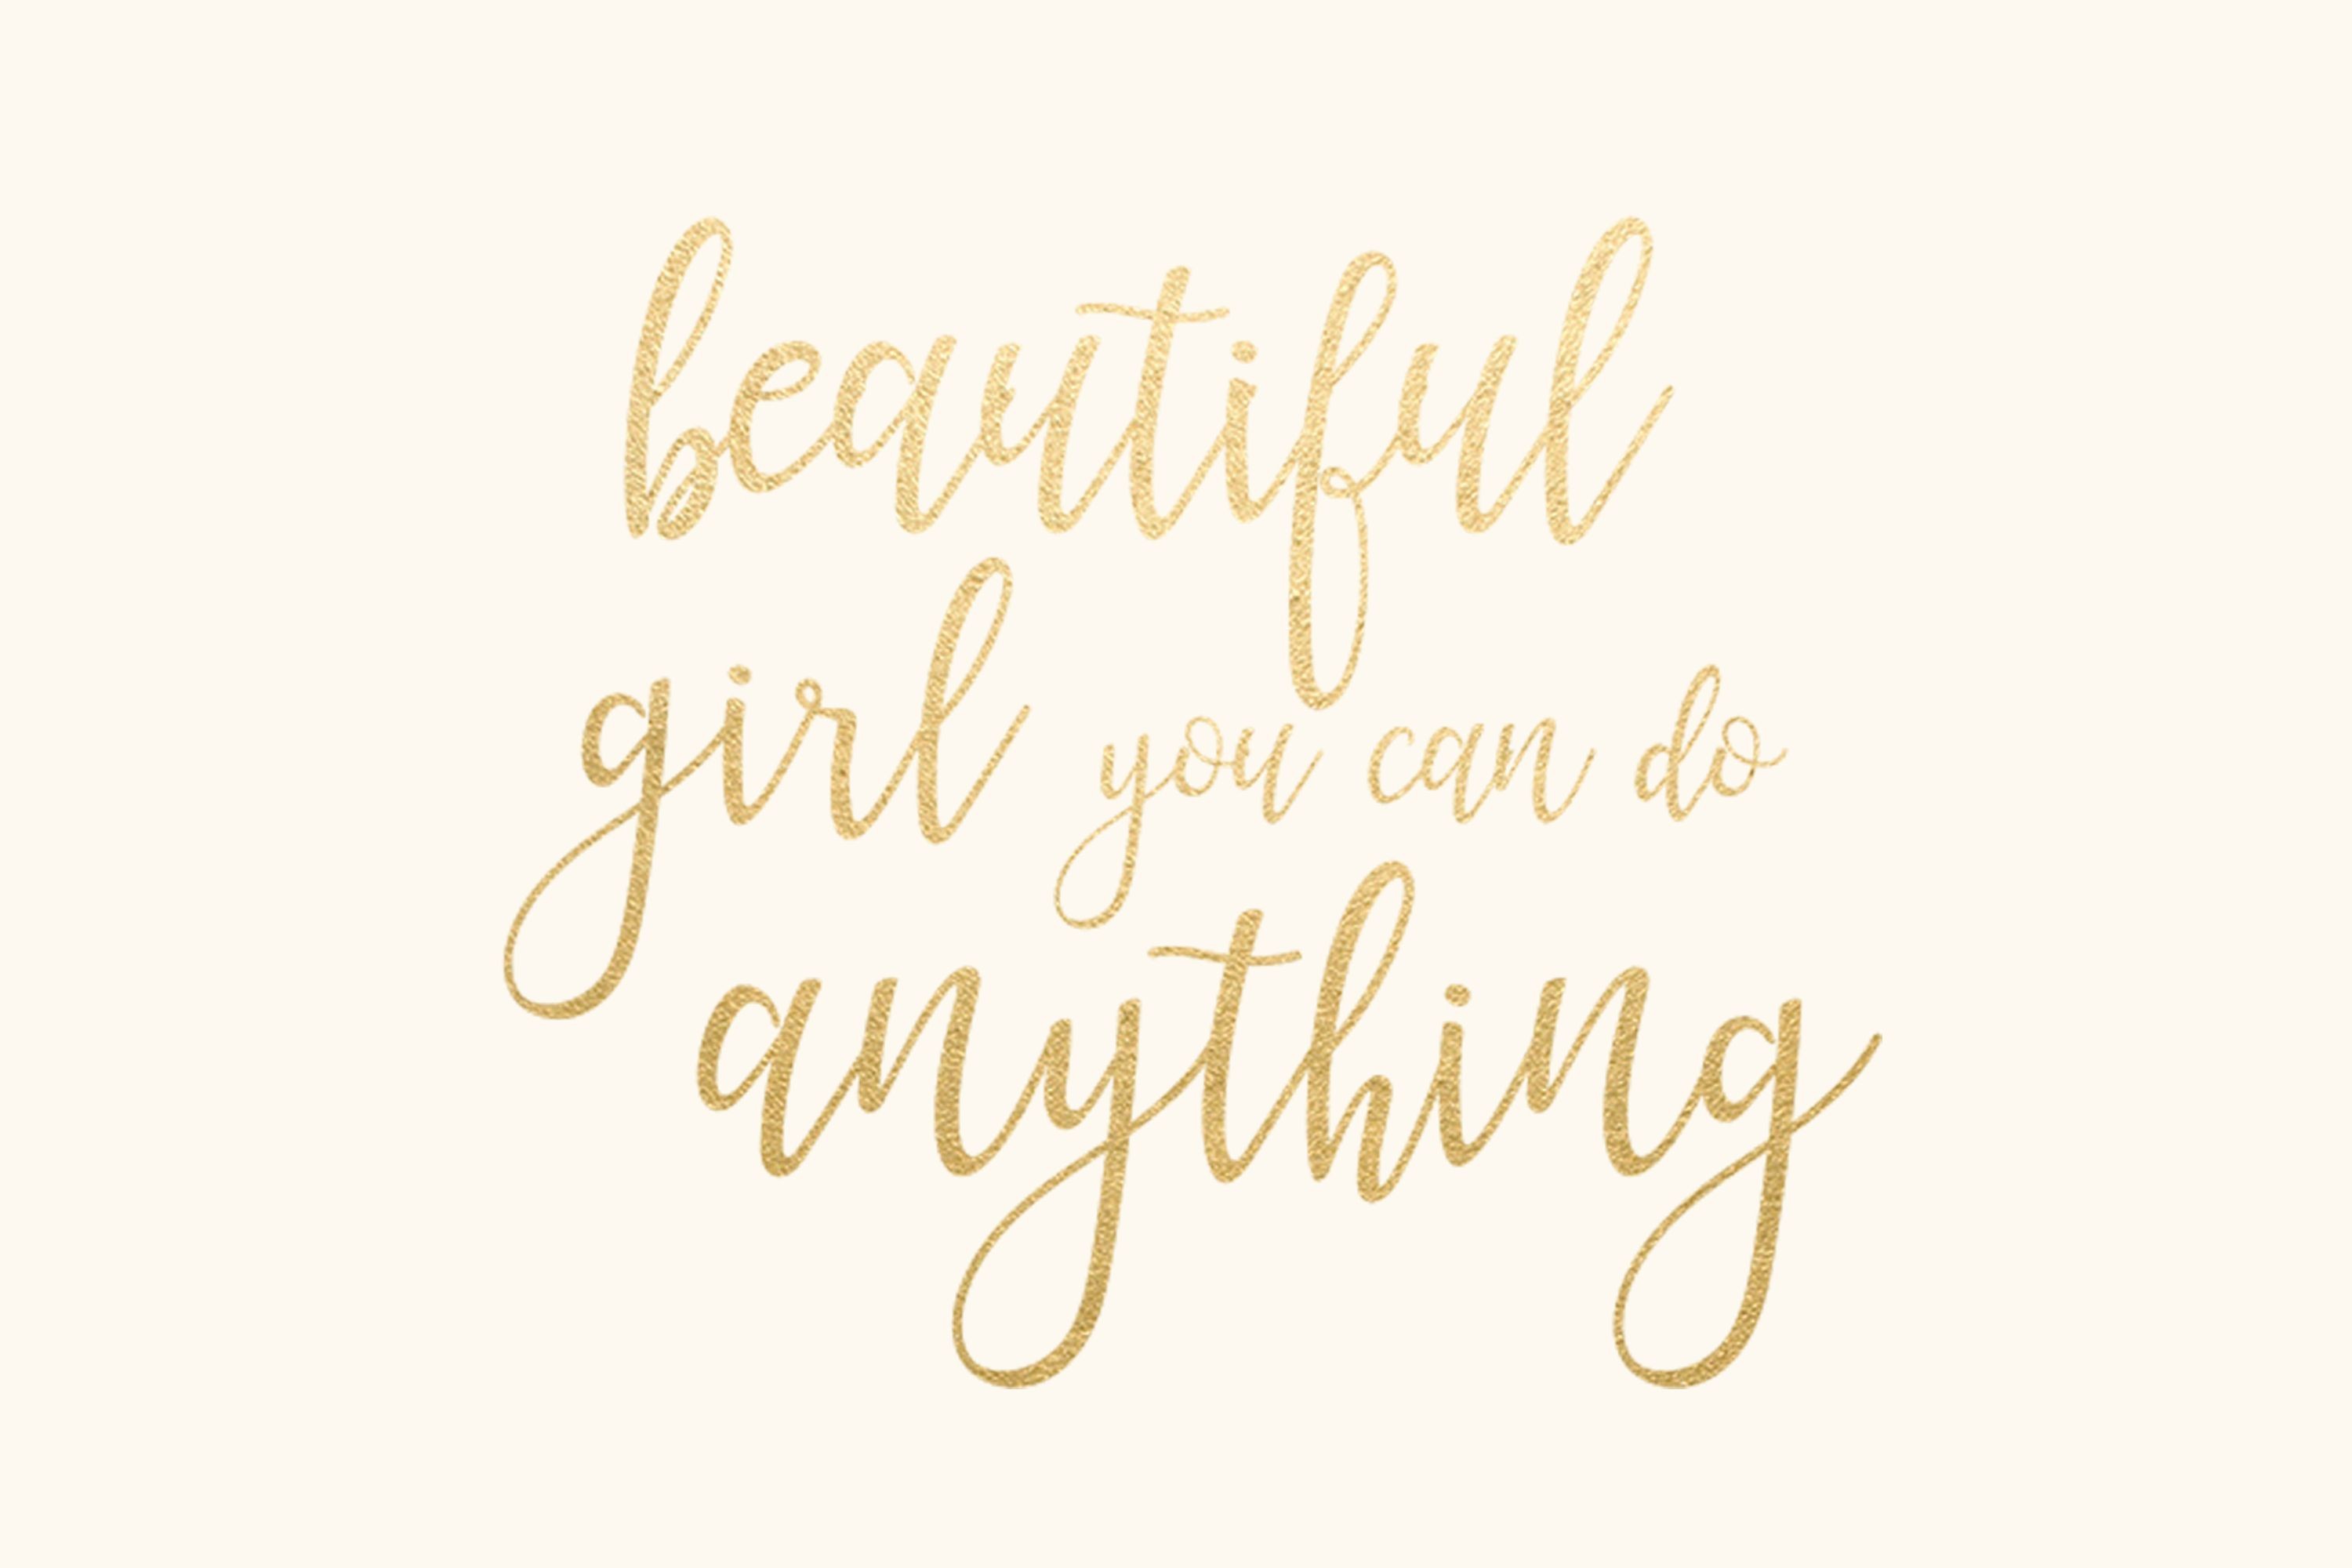 3000x2000 Beautiful Girl You Can Do Anything Gold Foil Quote Desktop Background /  Wallpaper